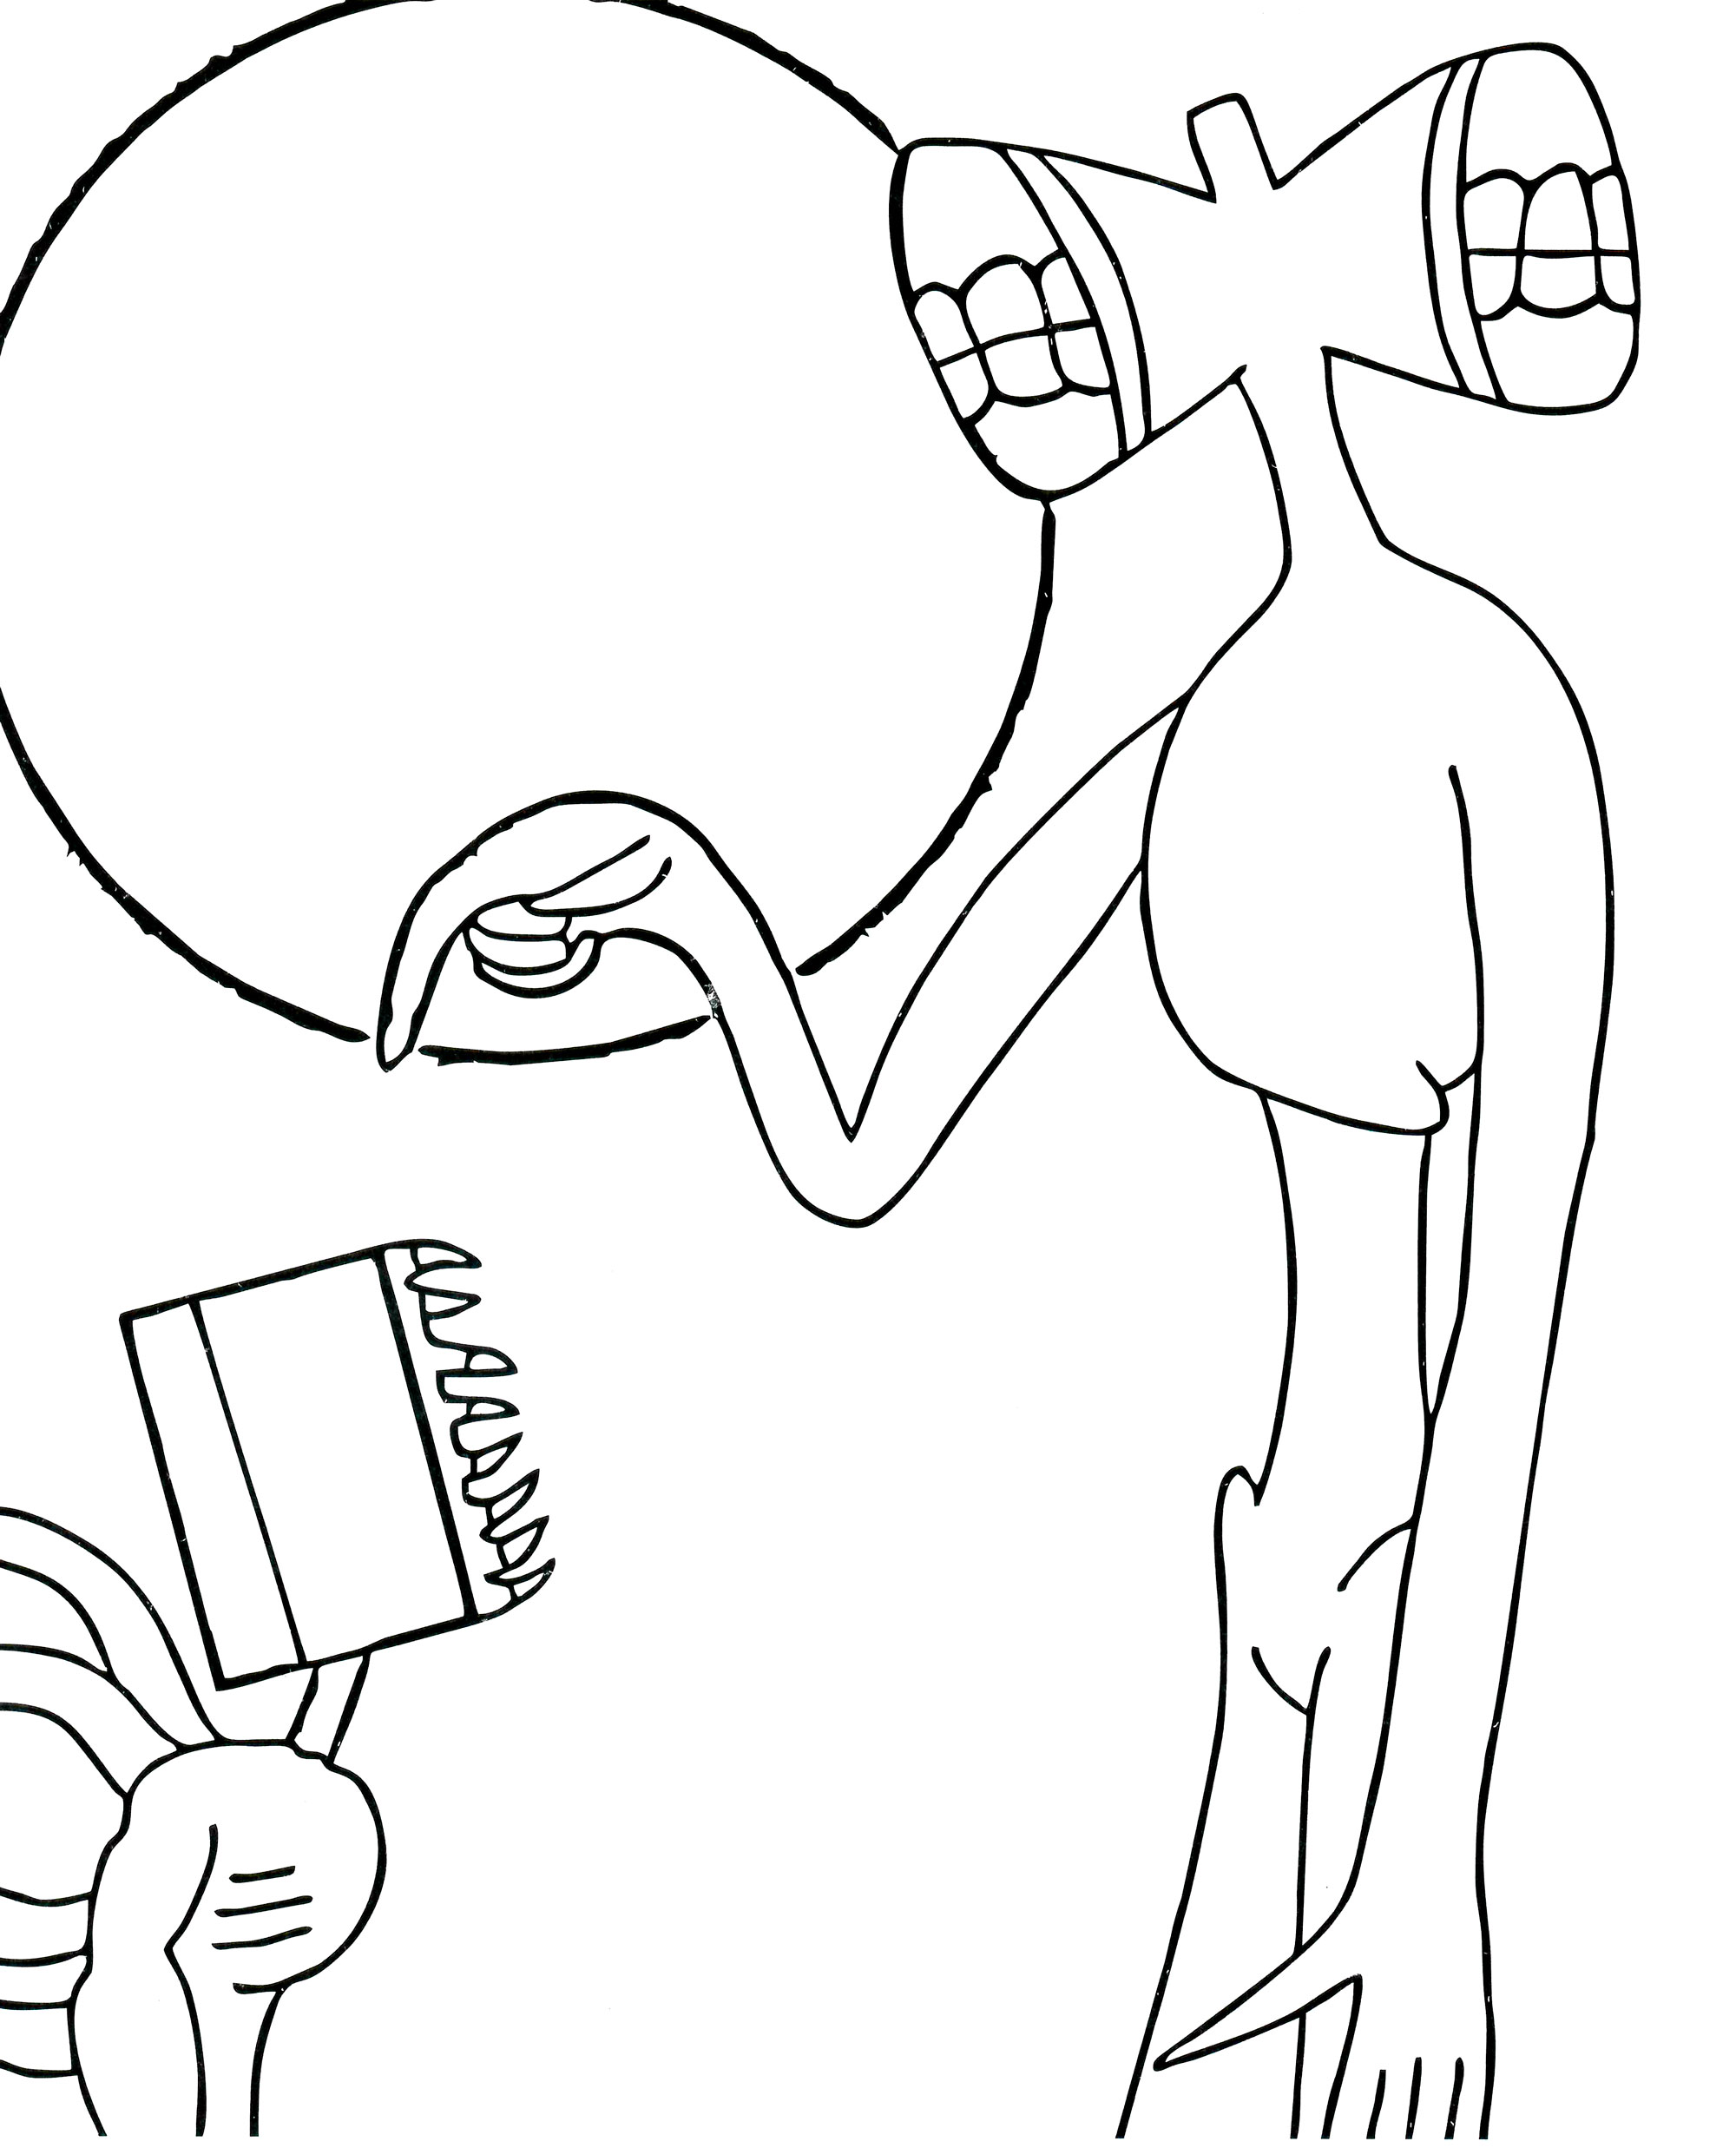 Siren head coloring page for boys